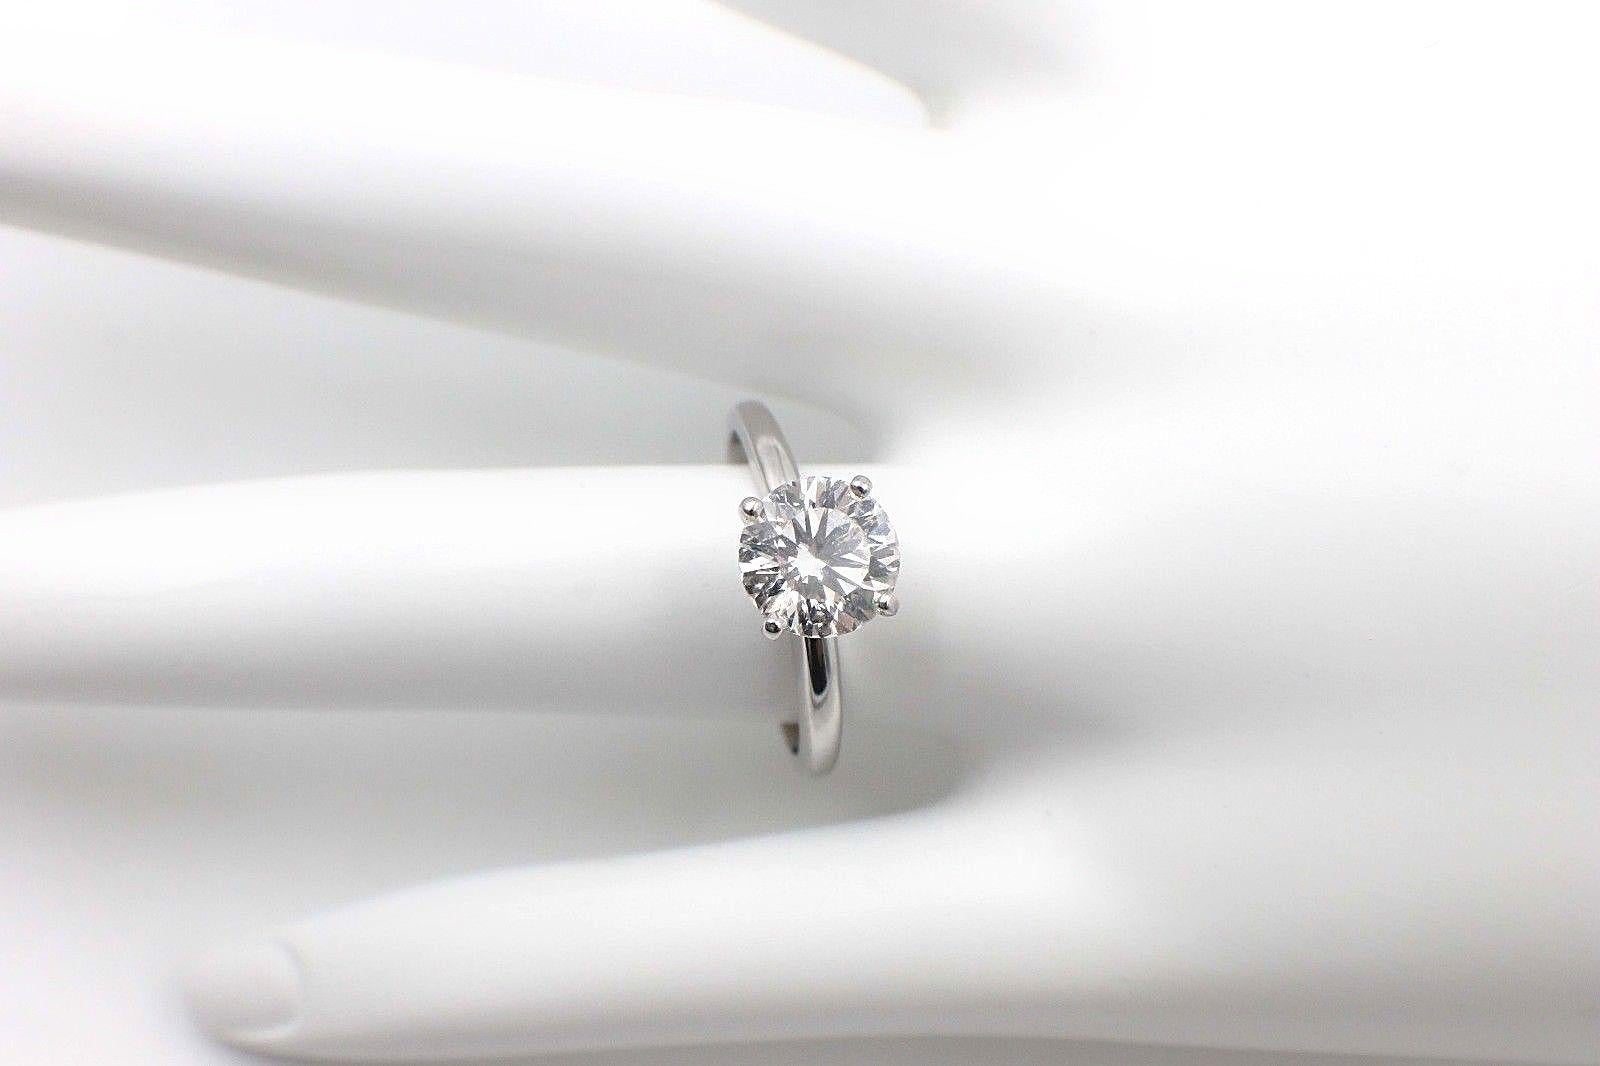 Celebration Diamond Engagement Ring Round 1.59 CTS I SI1 14K White Gold GIA  In Excellent Condition For Sale In San Diego, CA